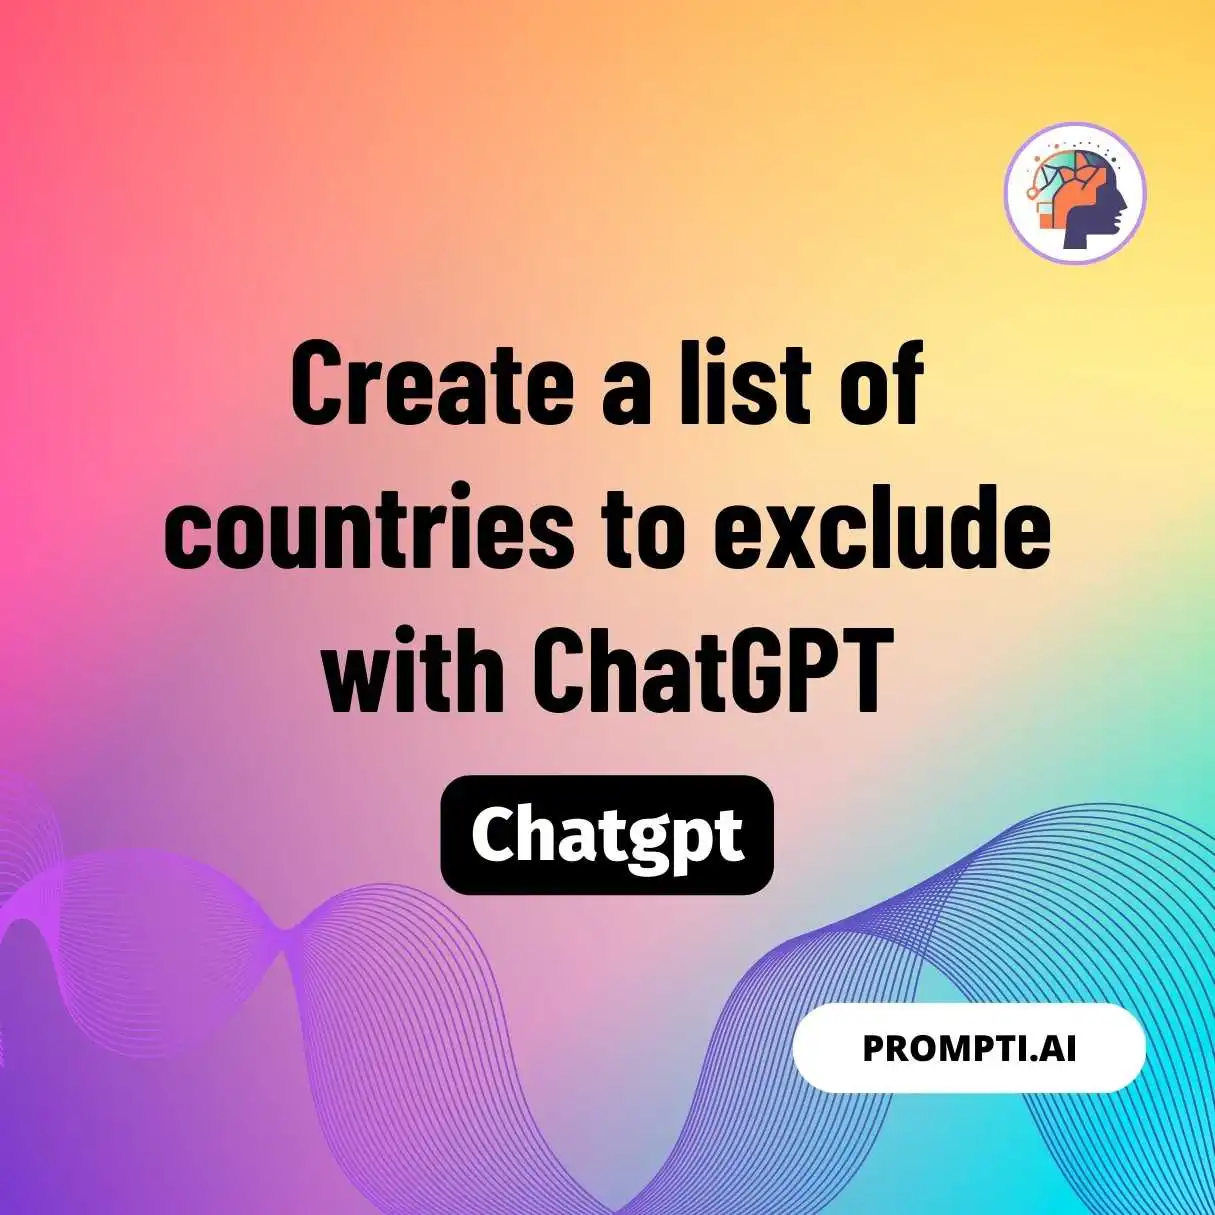 Create a list of countries to exclude with ChatGPT